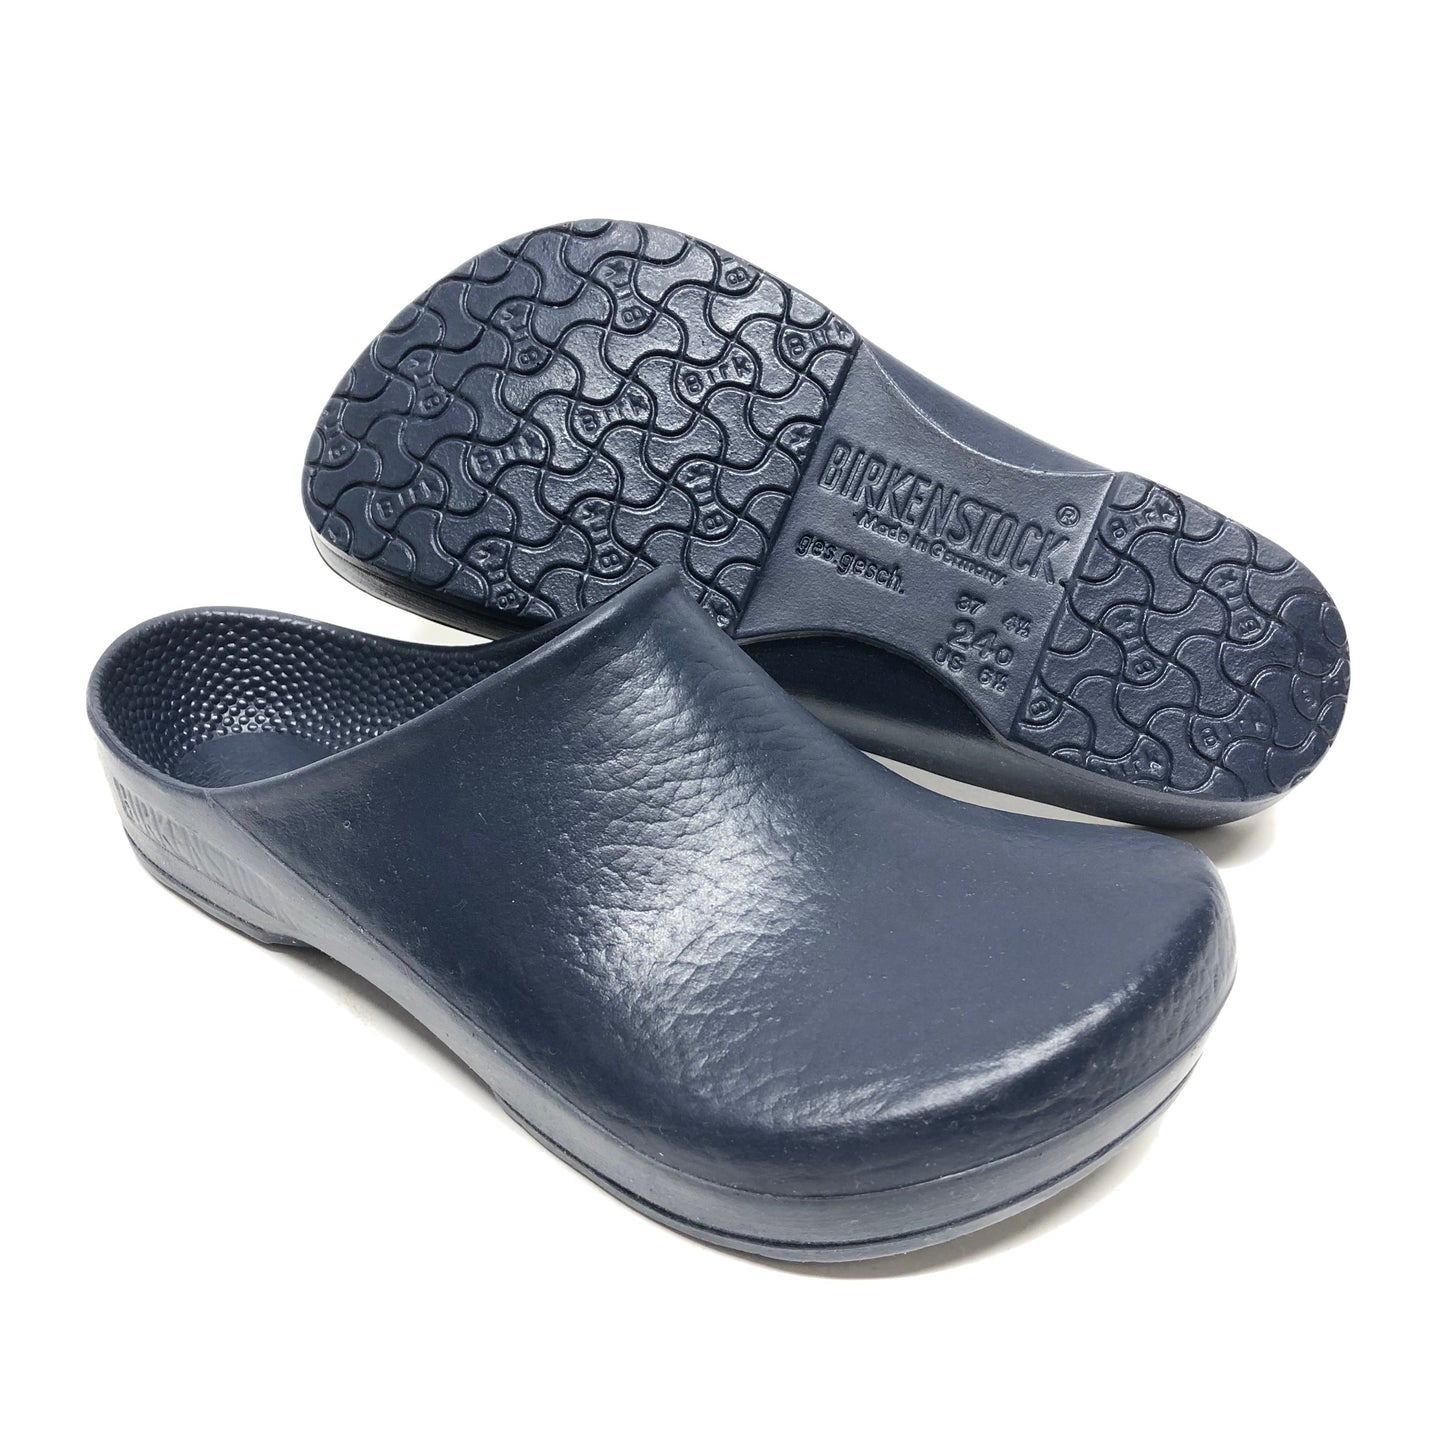 Shoes Flats By Birkenstock  Size: 6.5